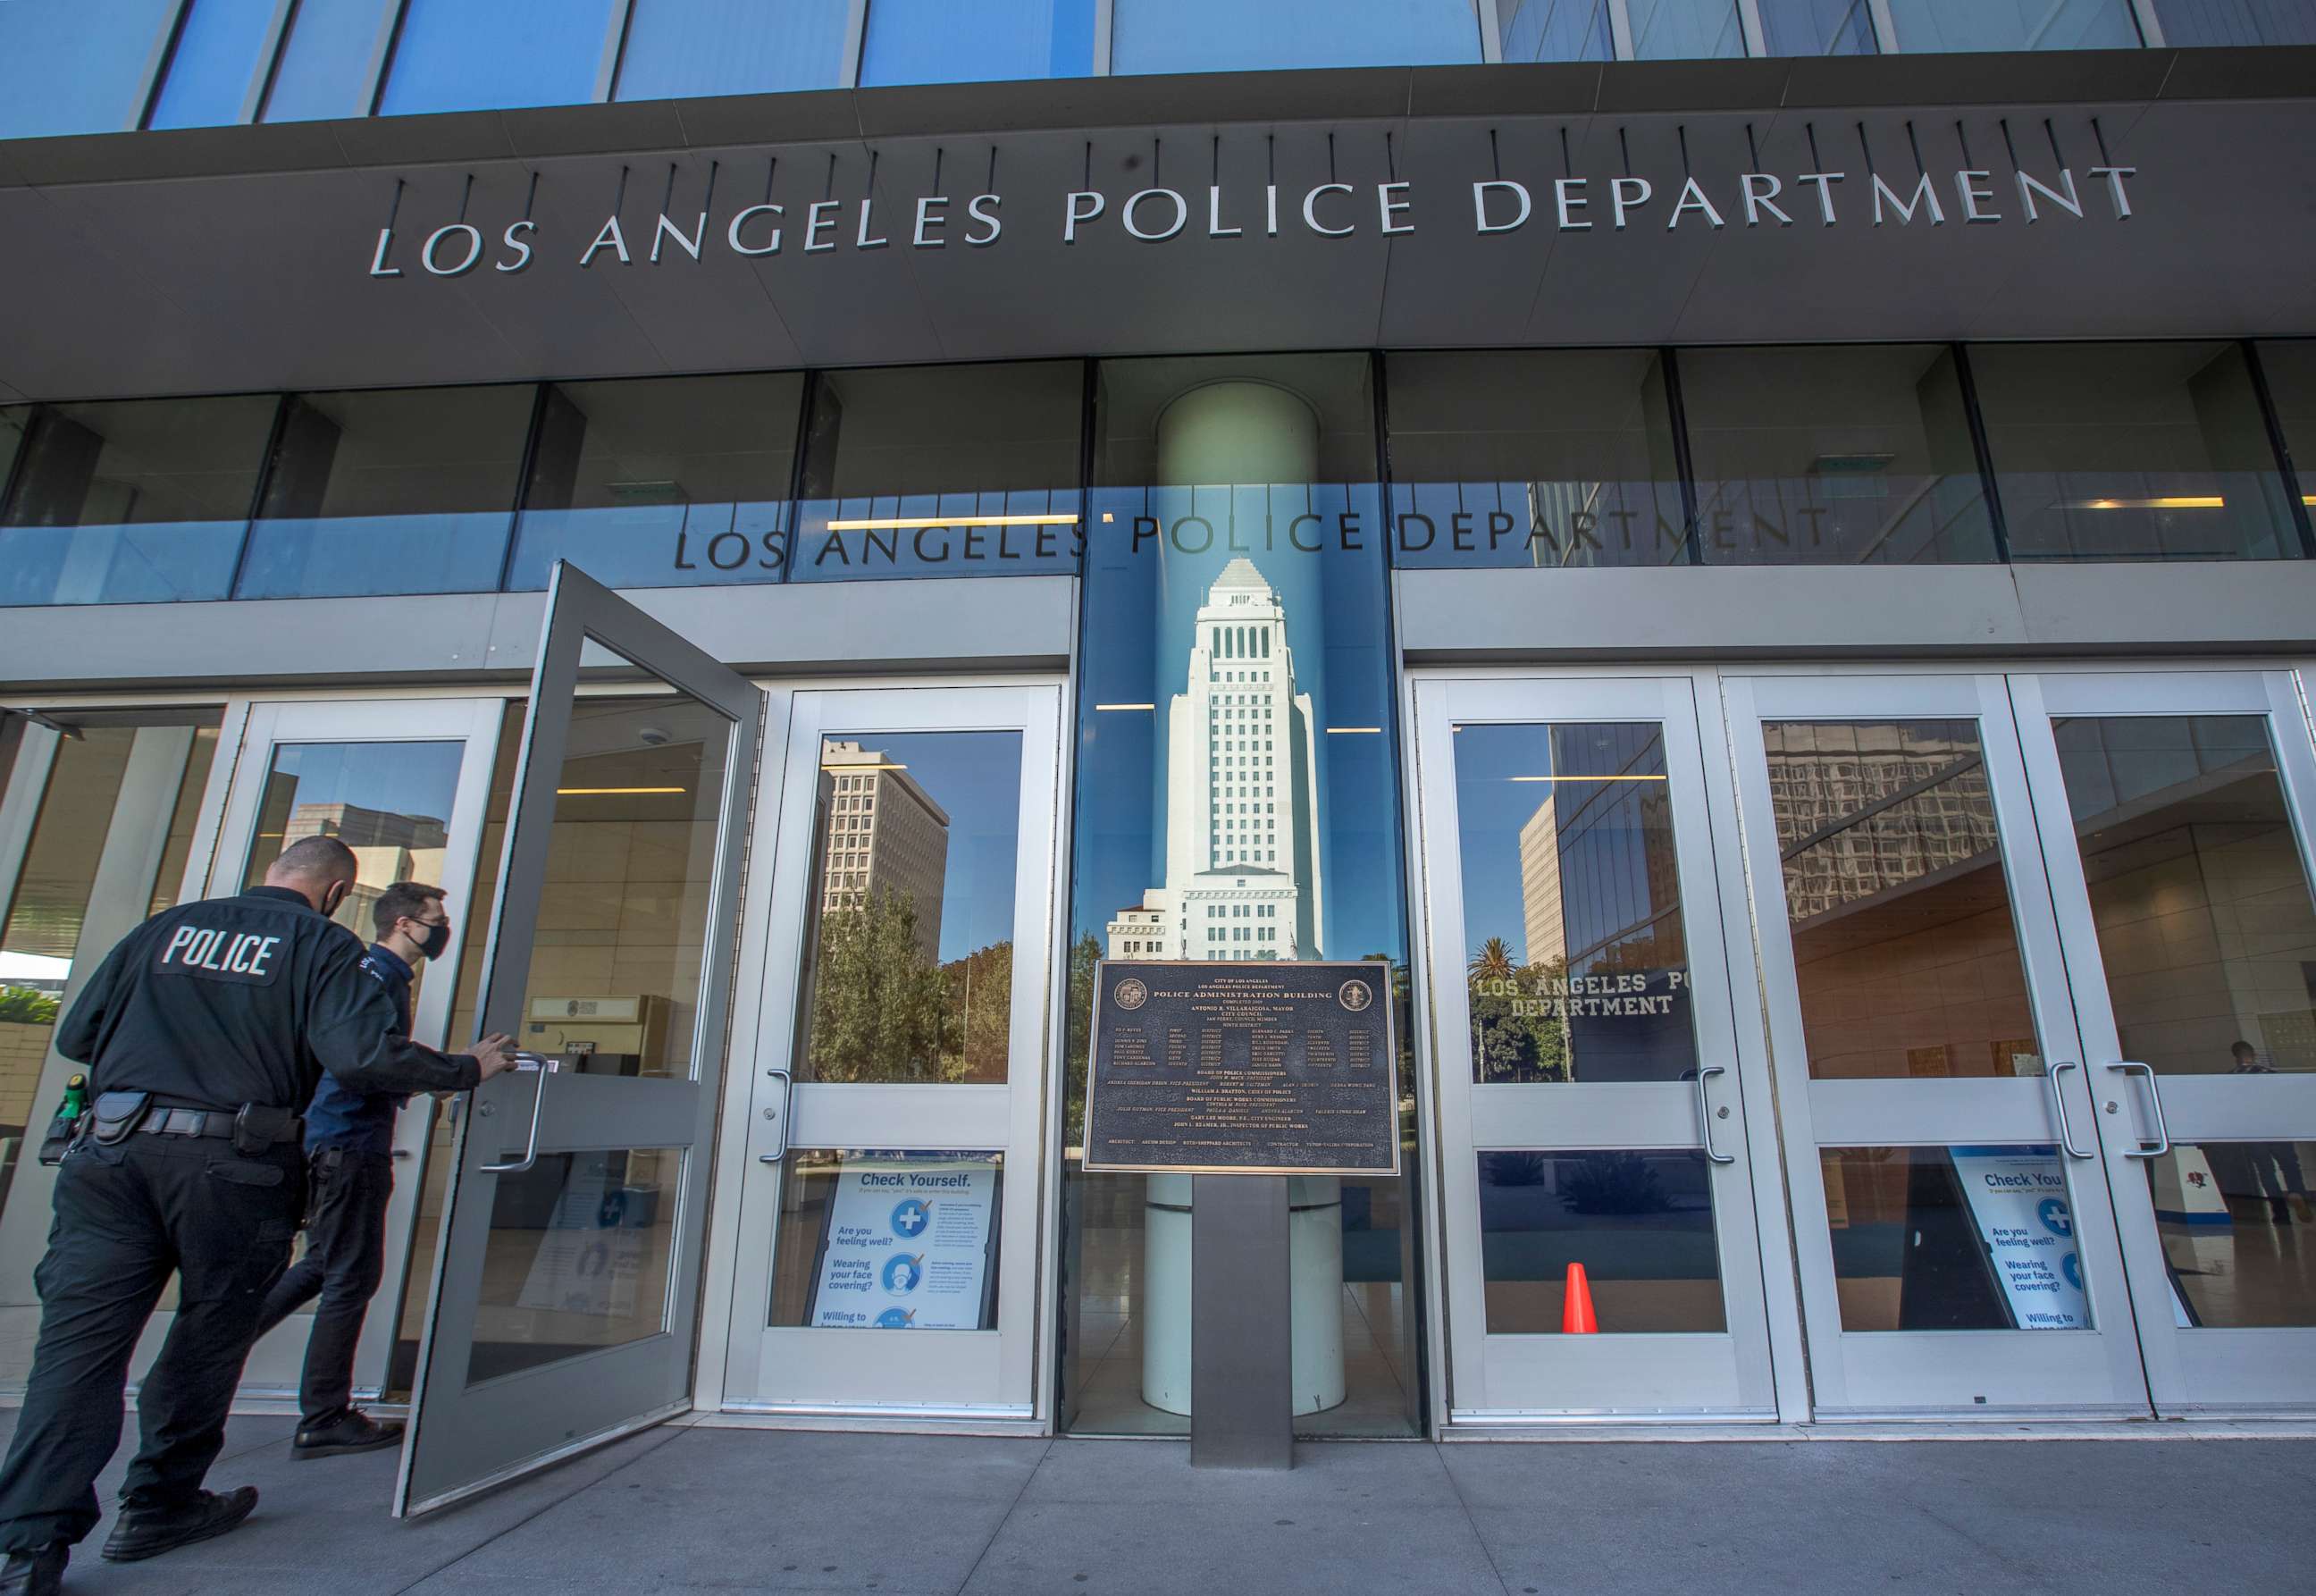 PHOTO: The front entrance to LAPD Headquarters on 1st St. in downtown Los Angeles.